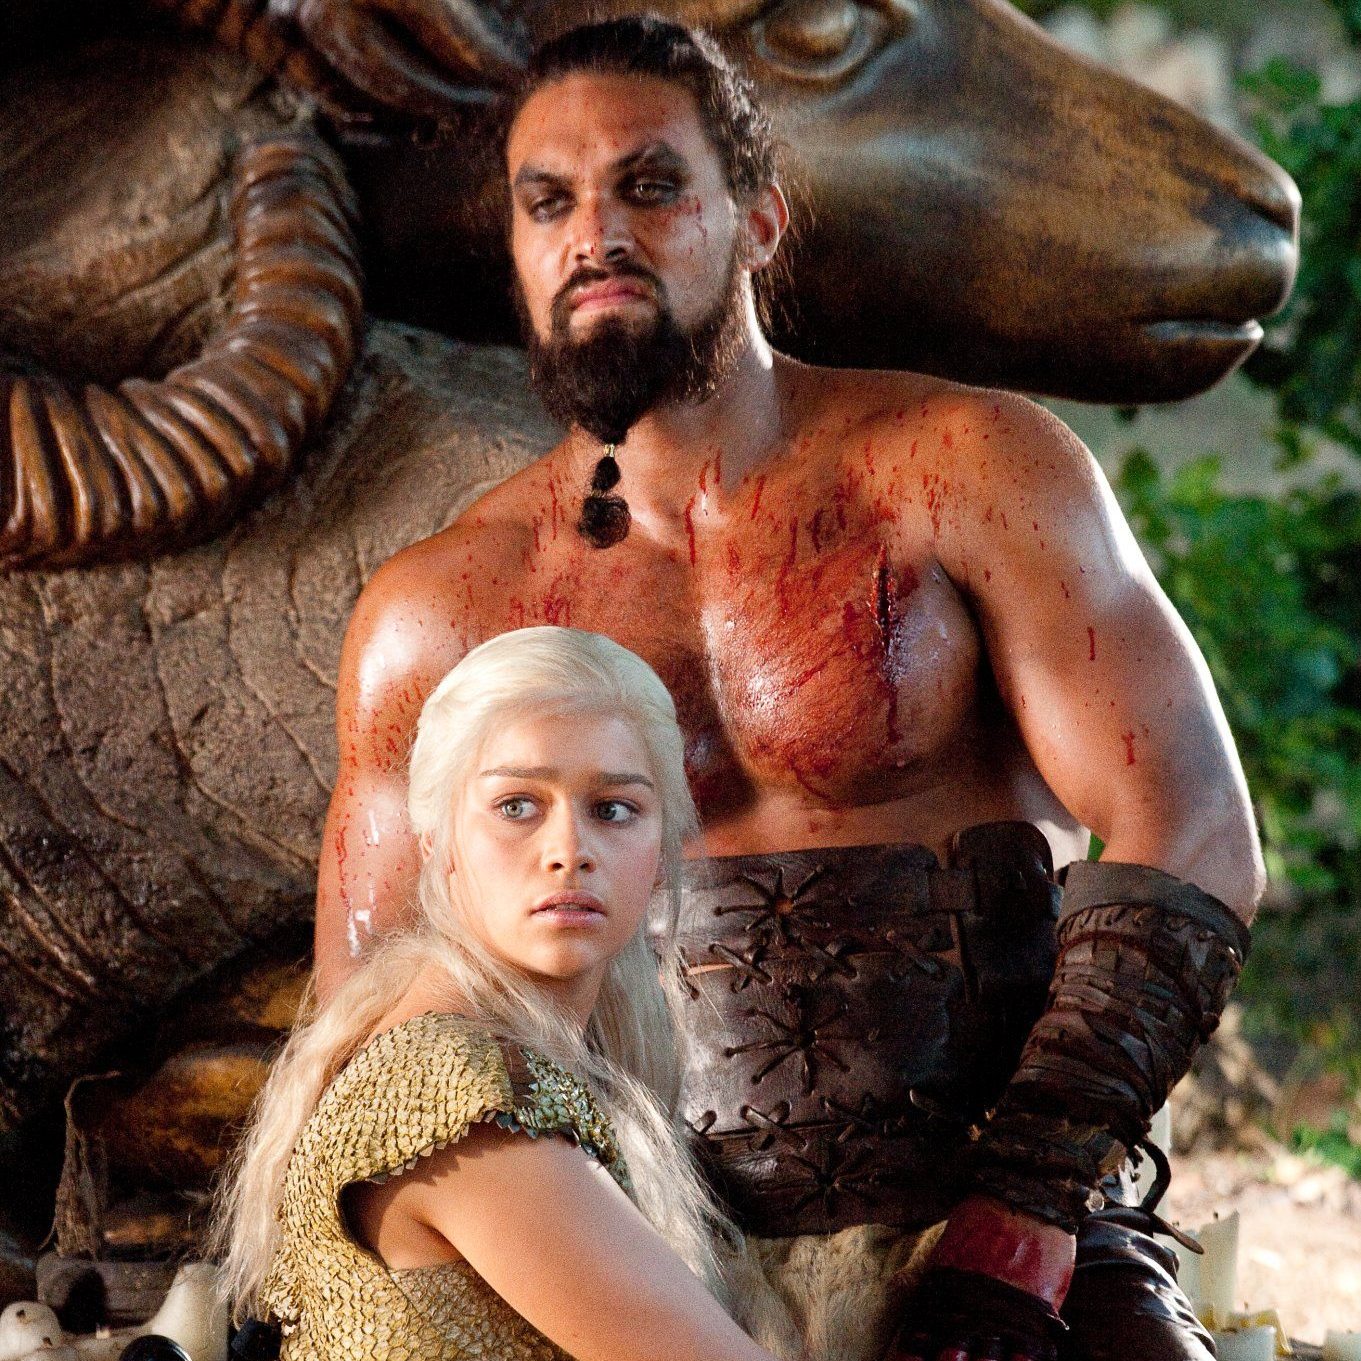 ⚔️ Only “Game of Thrones” Fanatics Can Get a Perfect Score on This Character Death Quiz Khal Drogo and Daenerys Targaryen